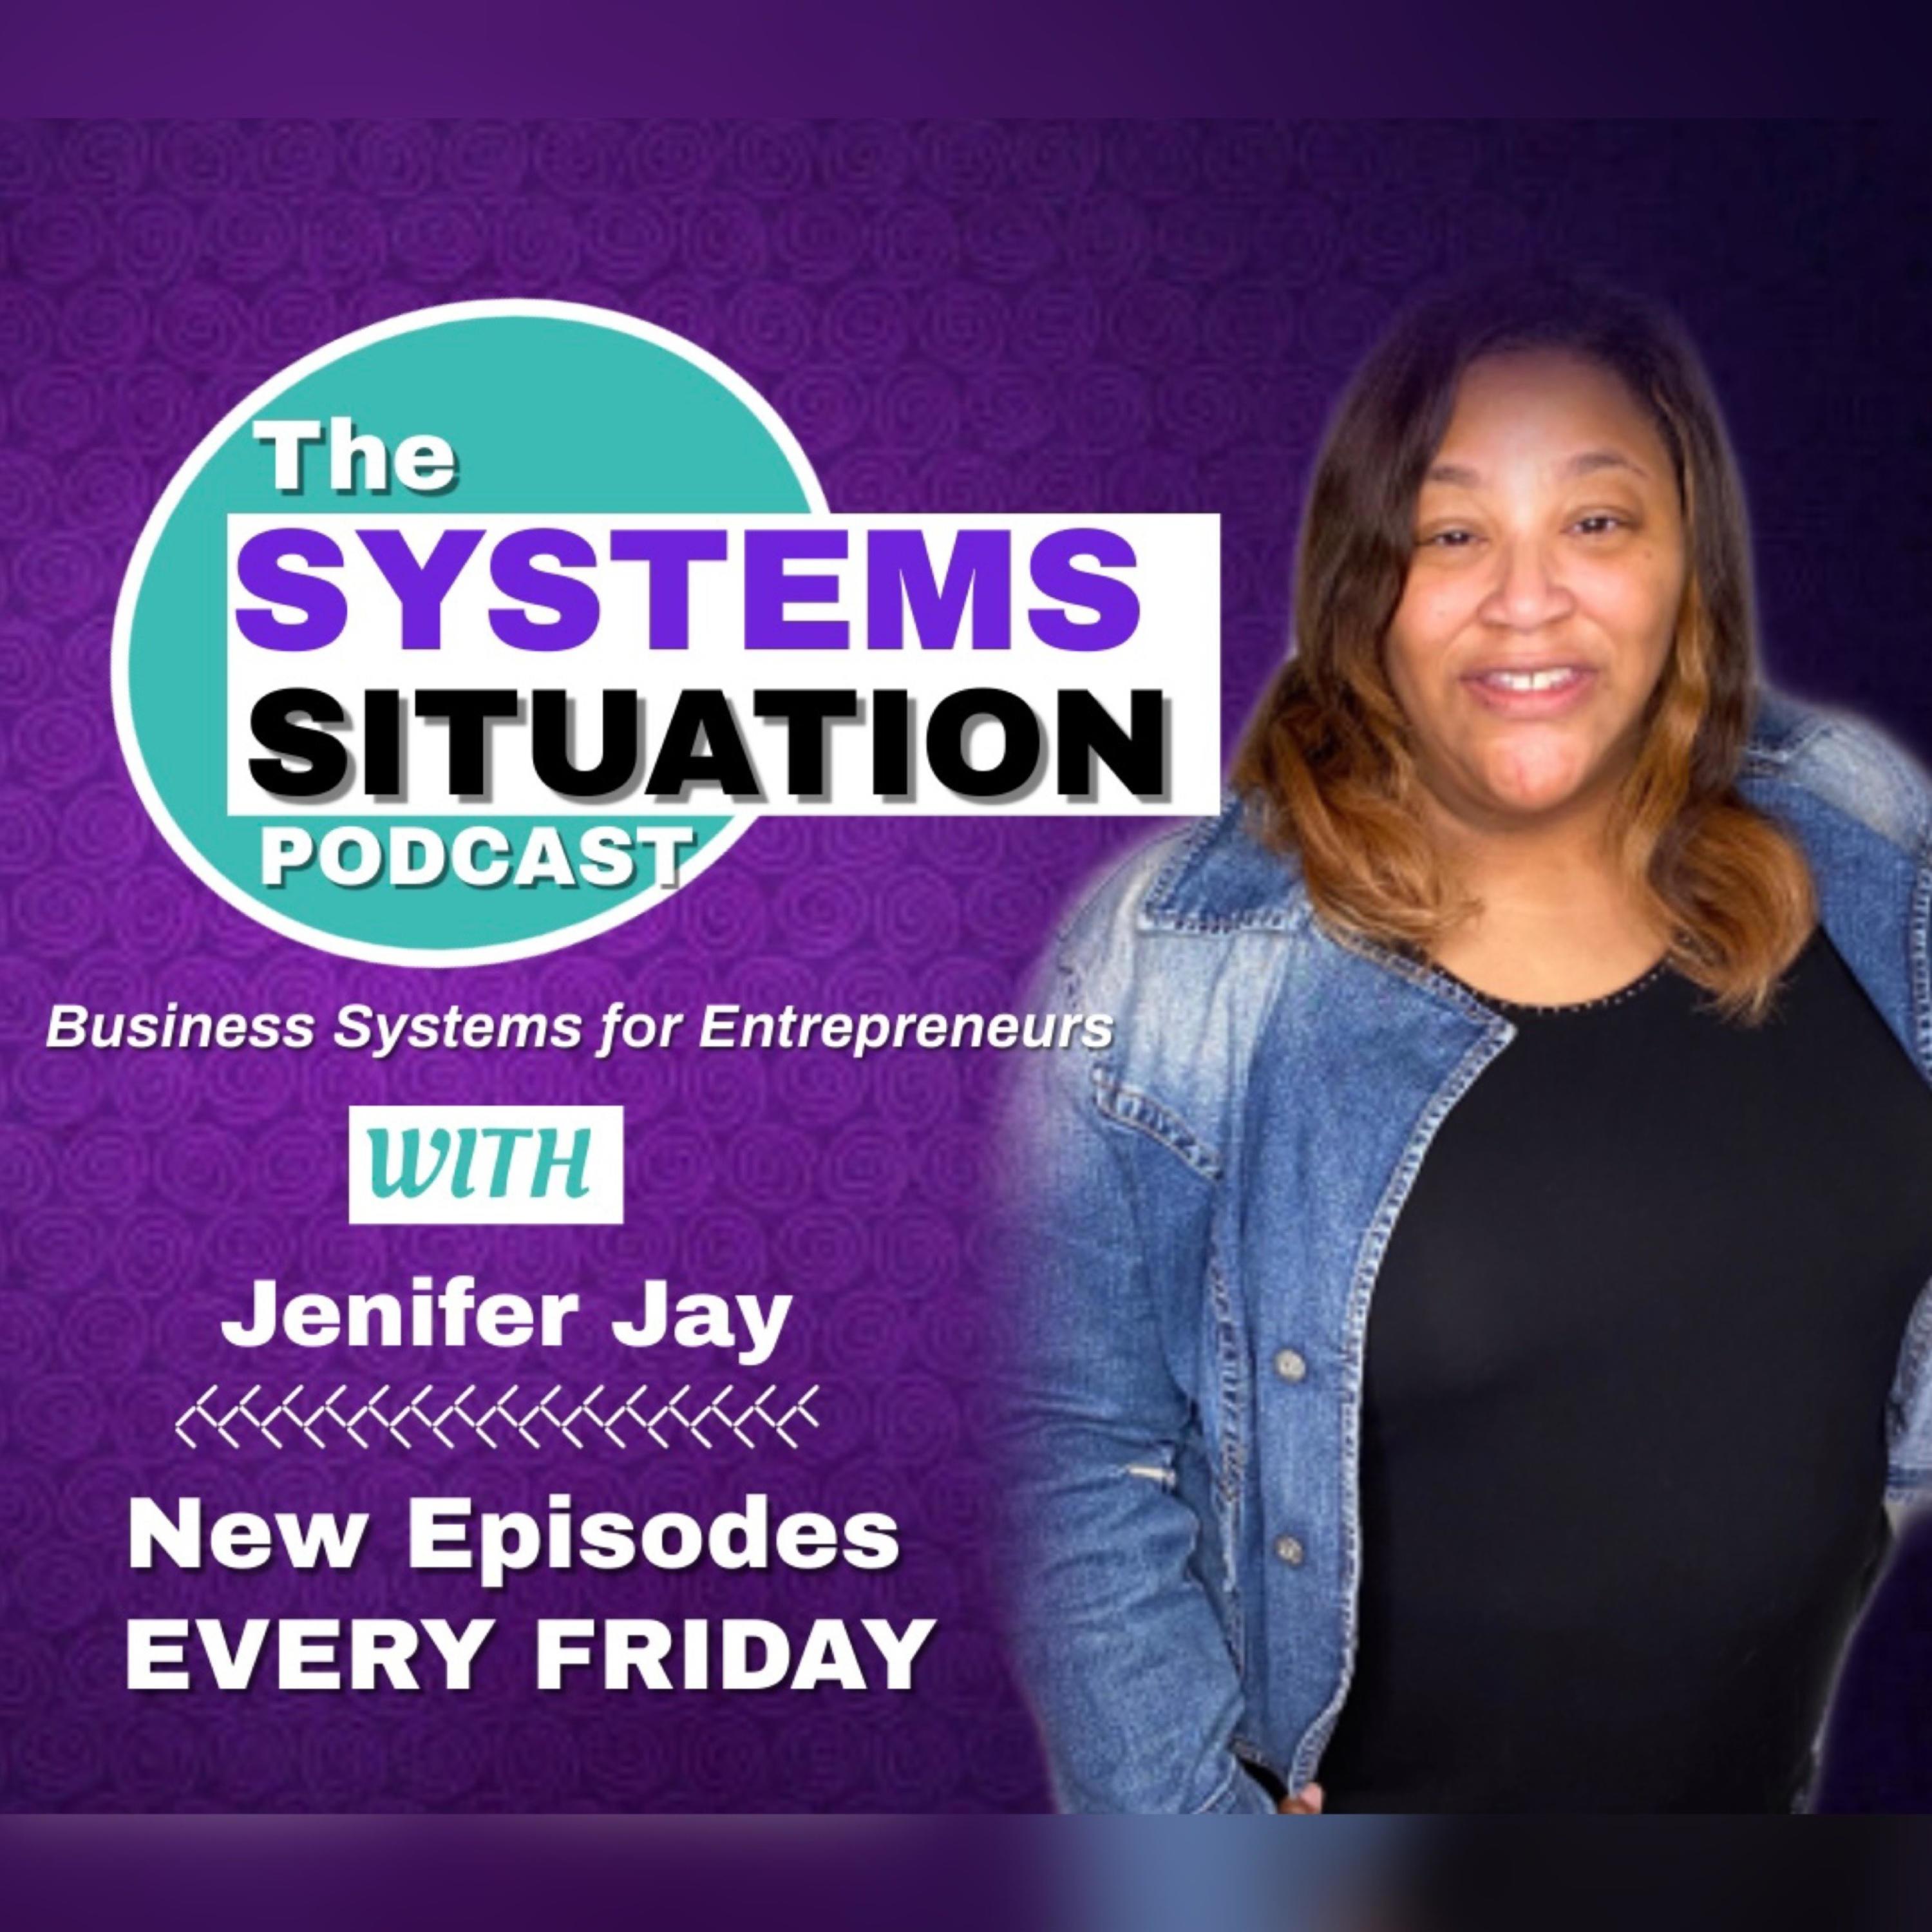 The Systems Situation Podcast